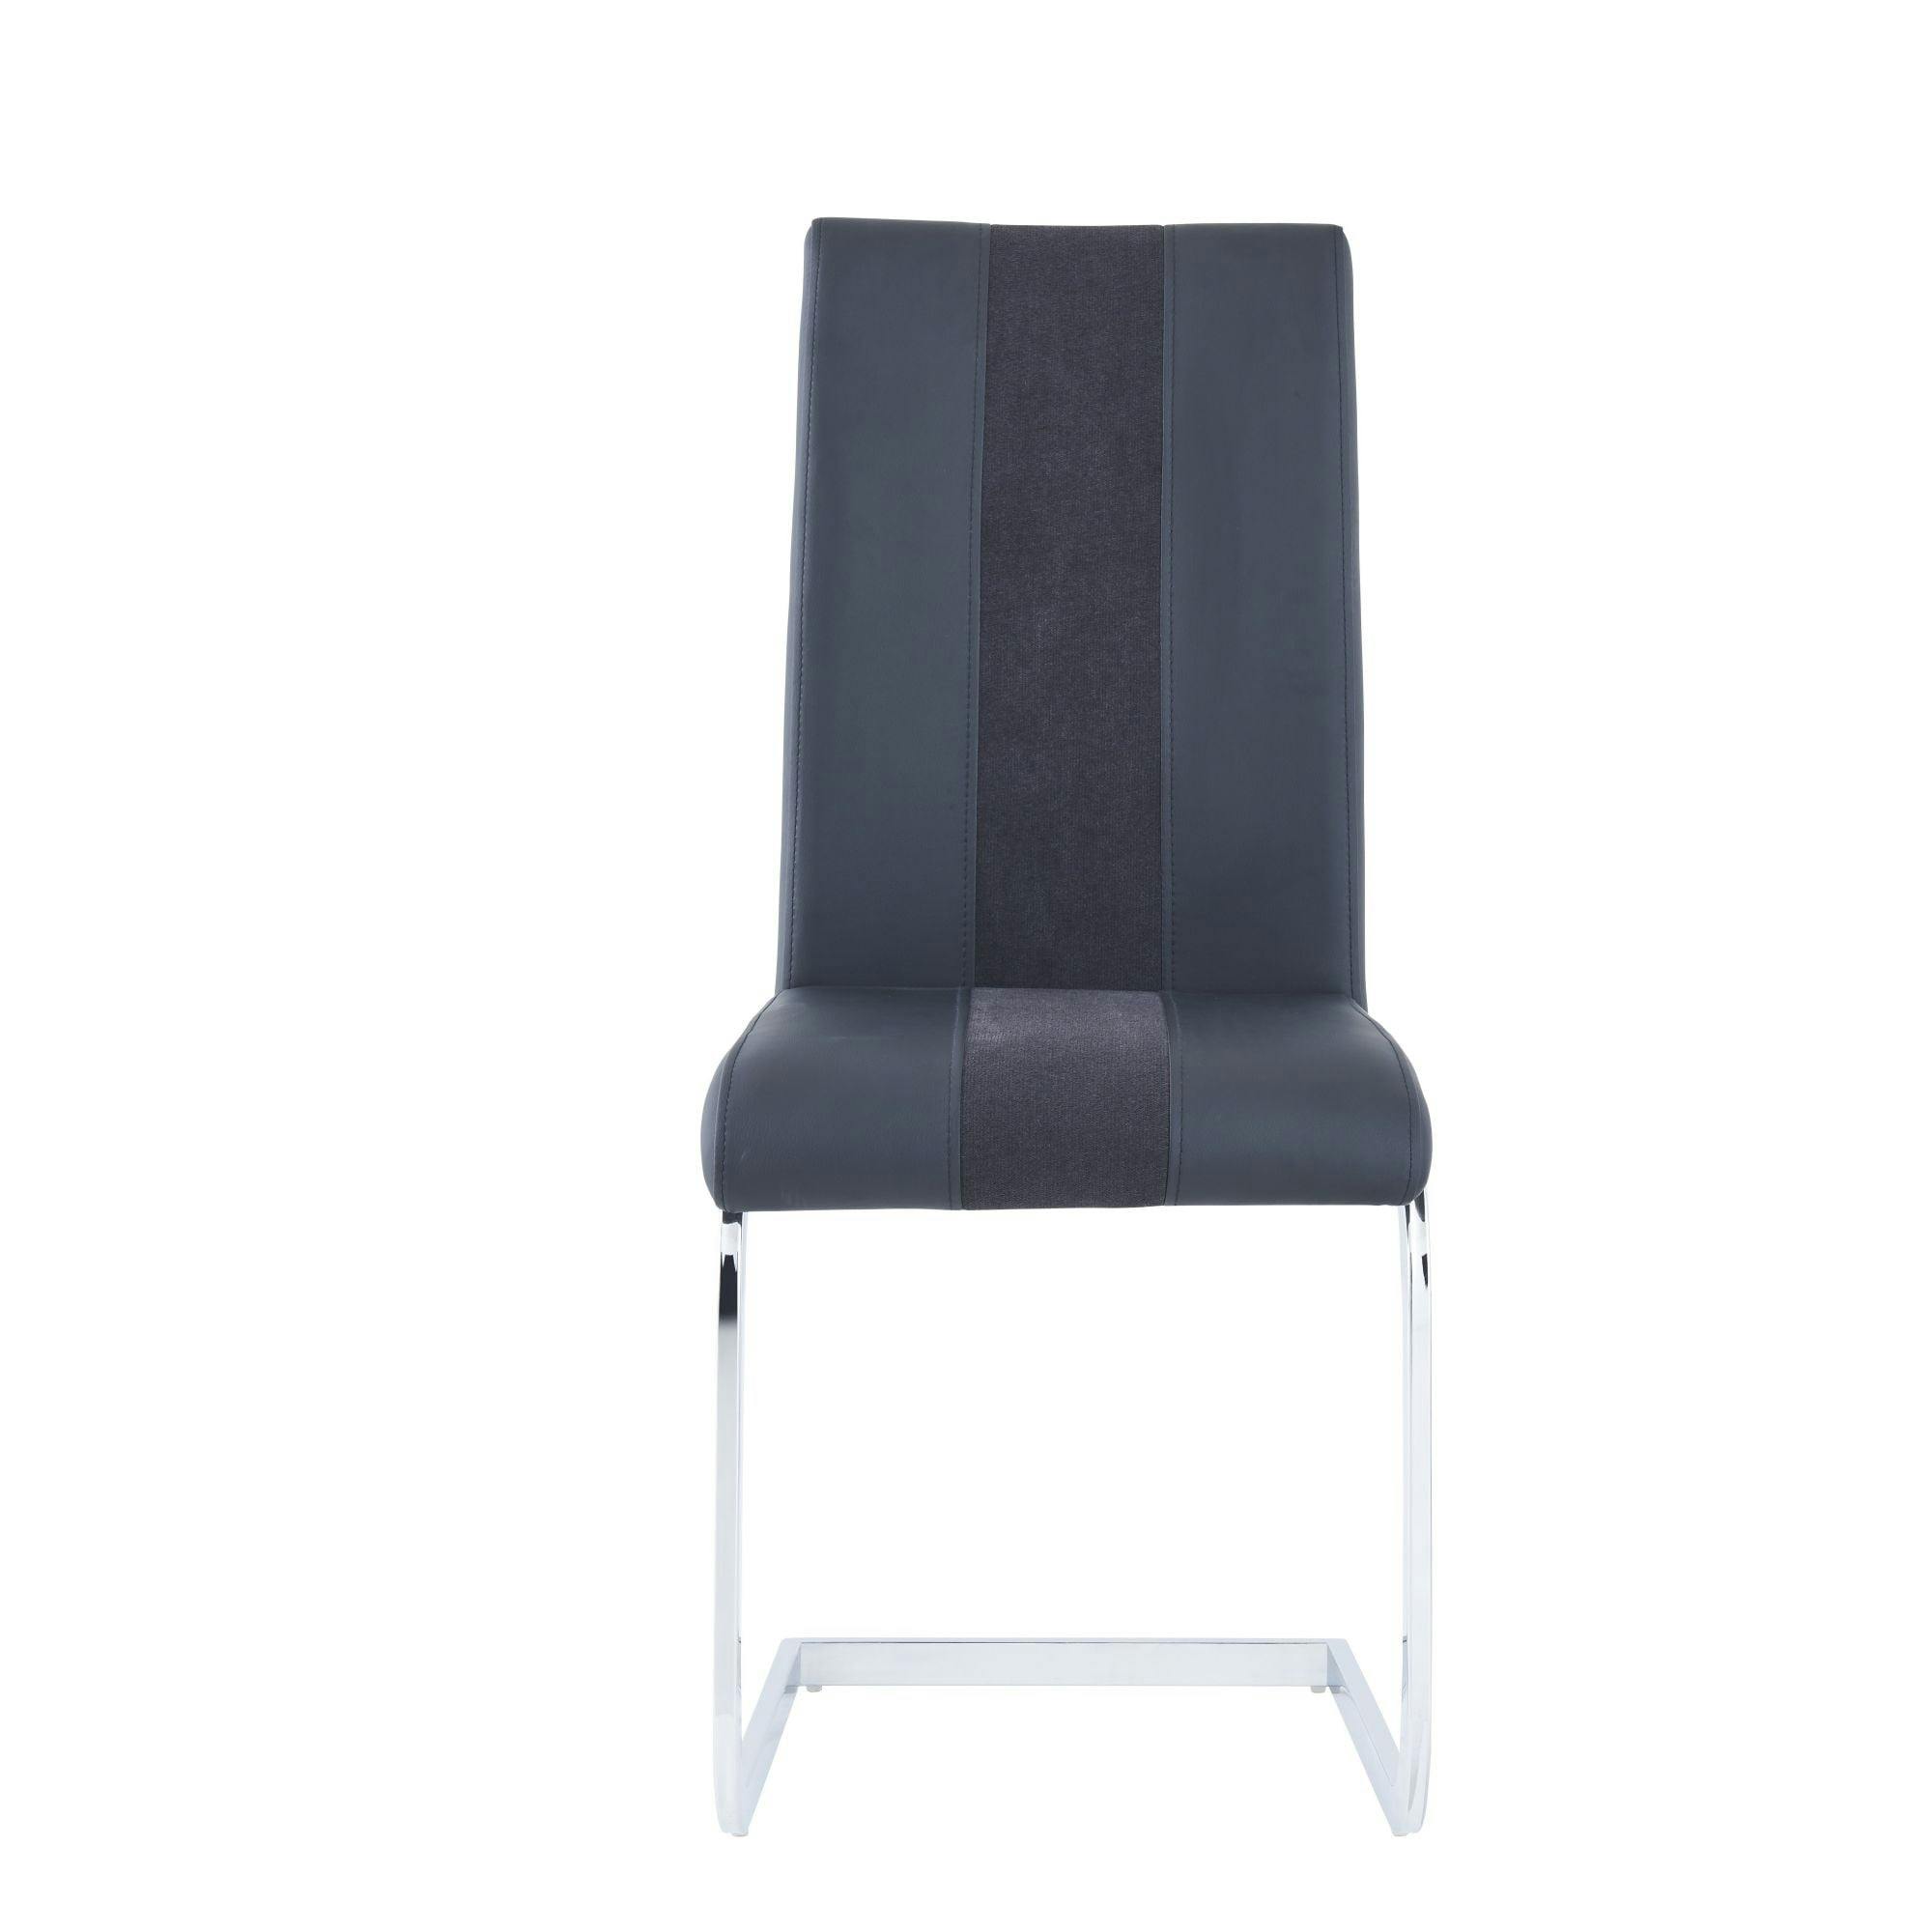 Sleek Black Faux Leather Upholstered Dining Chair with Metal Base